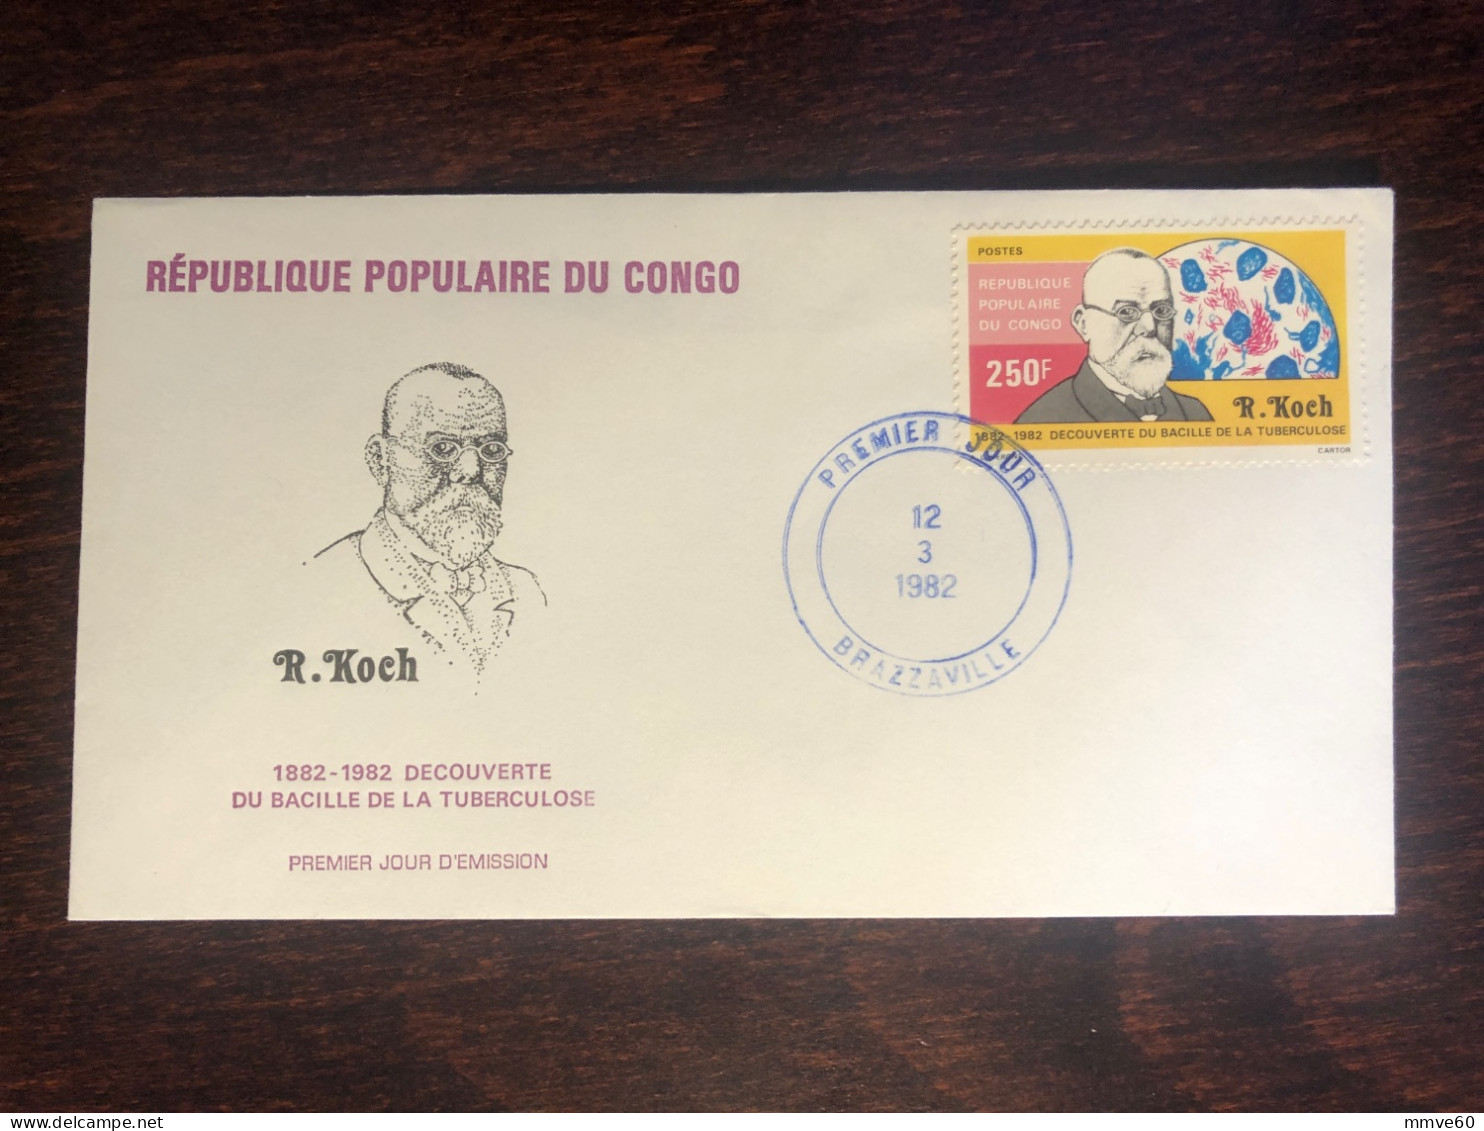 CONGO FDC COVER 1982 YEAR KOCH TUBERCULOSIS HEALTH MEDICINE STAMPS - FDC